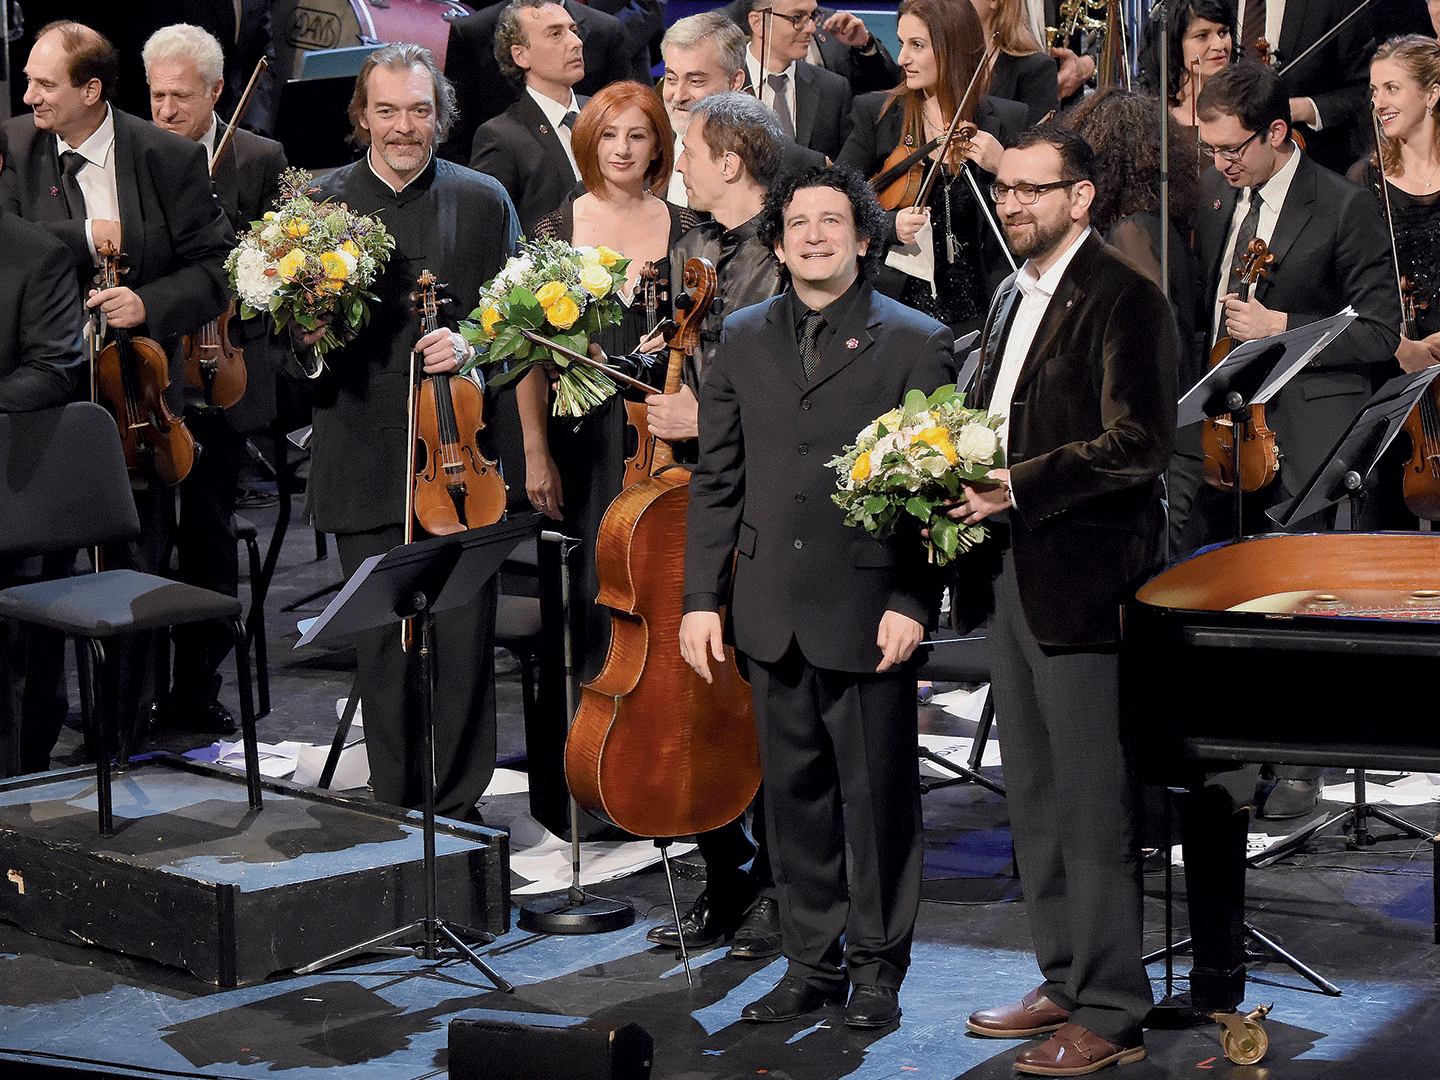 Male musician receives a bouquet of flowers at the conclusion of a concert